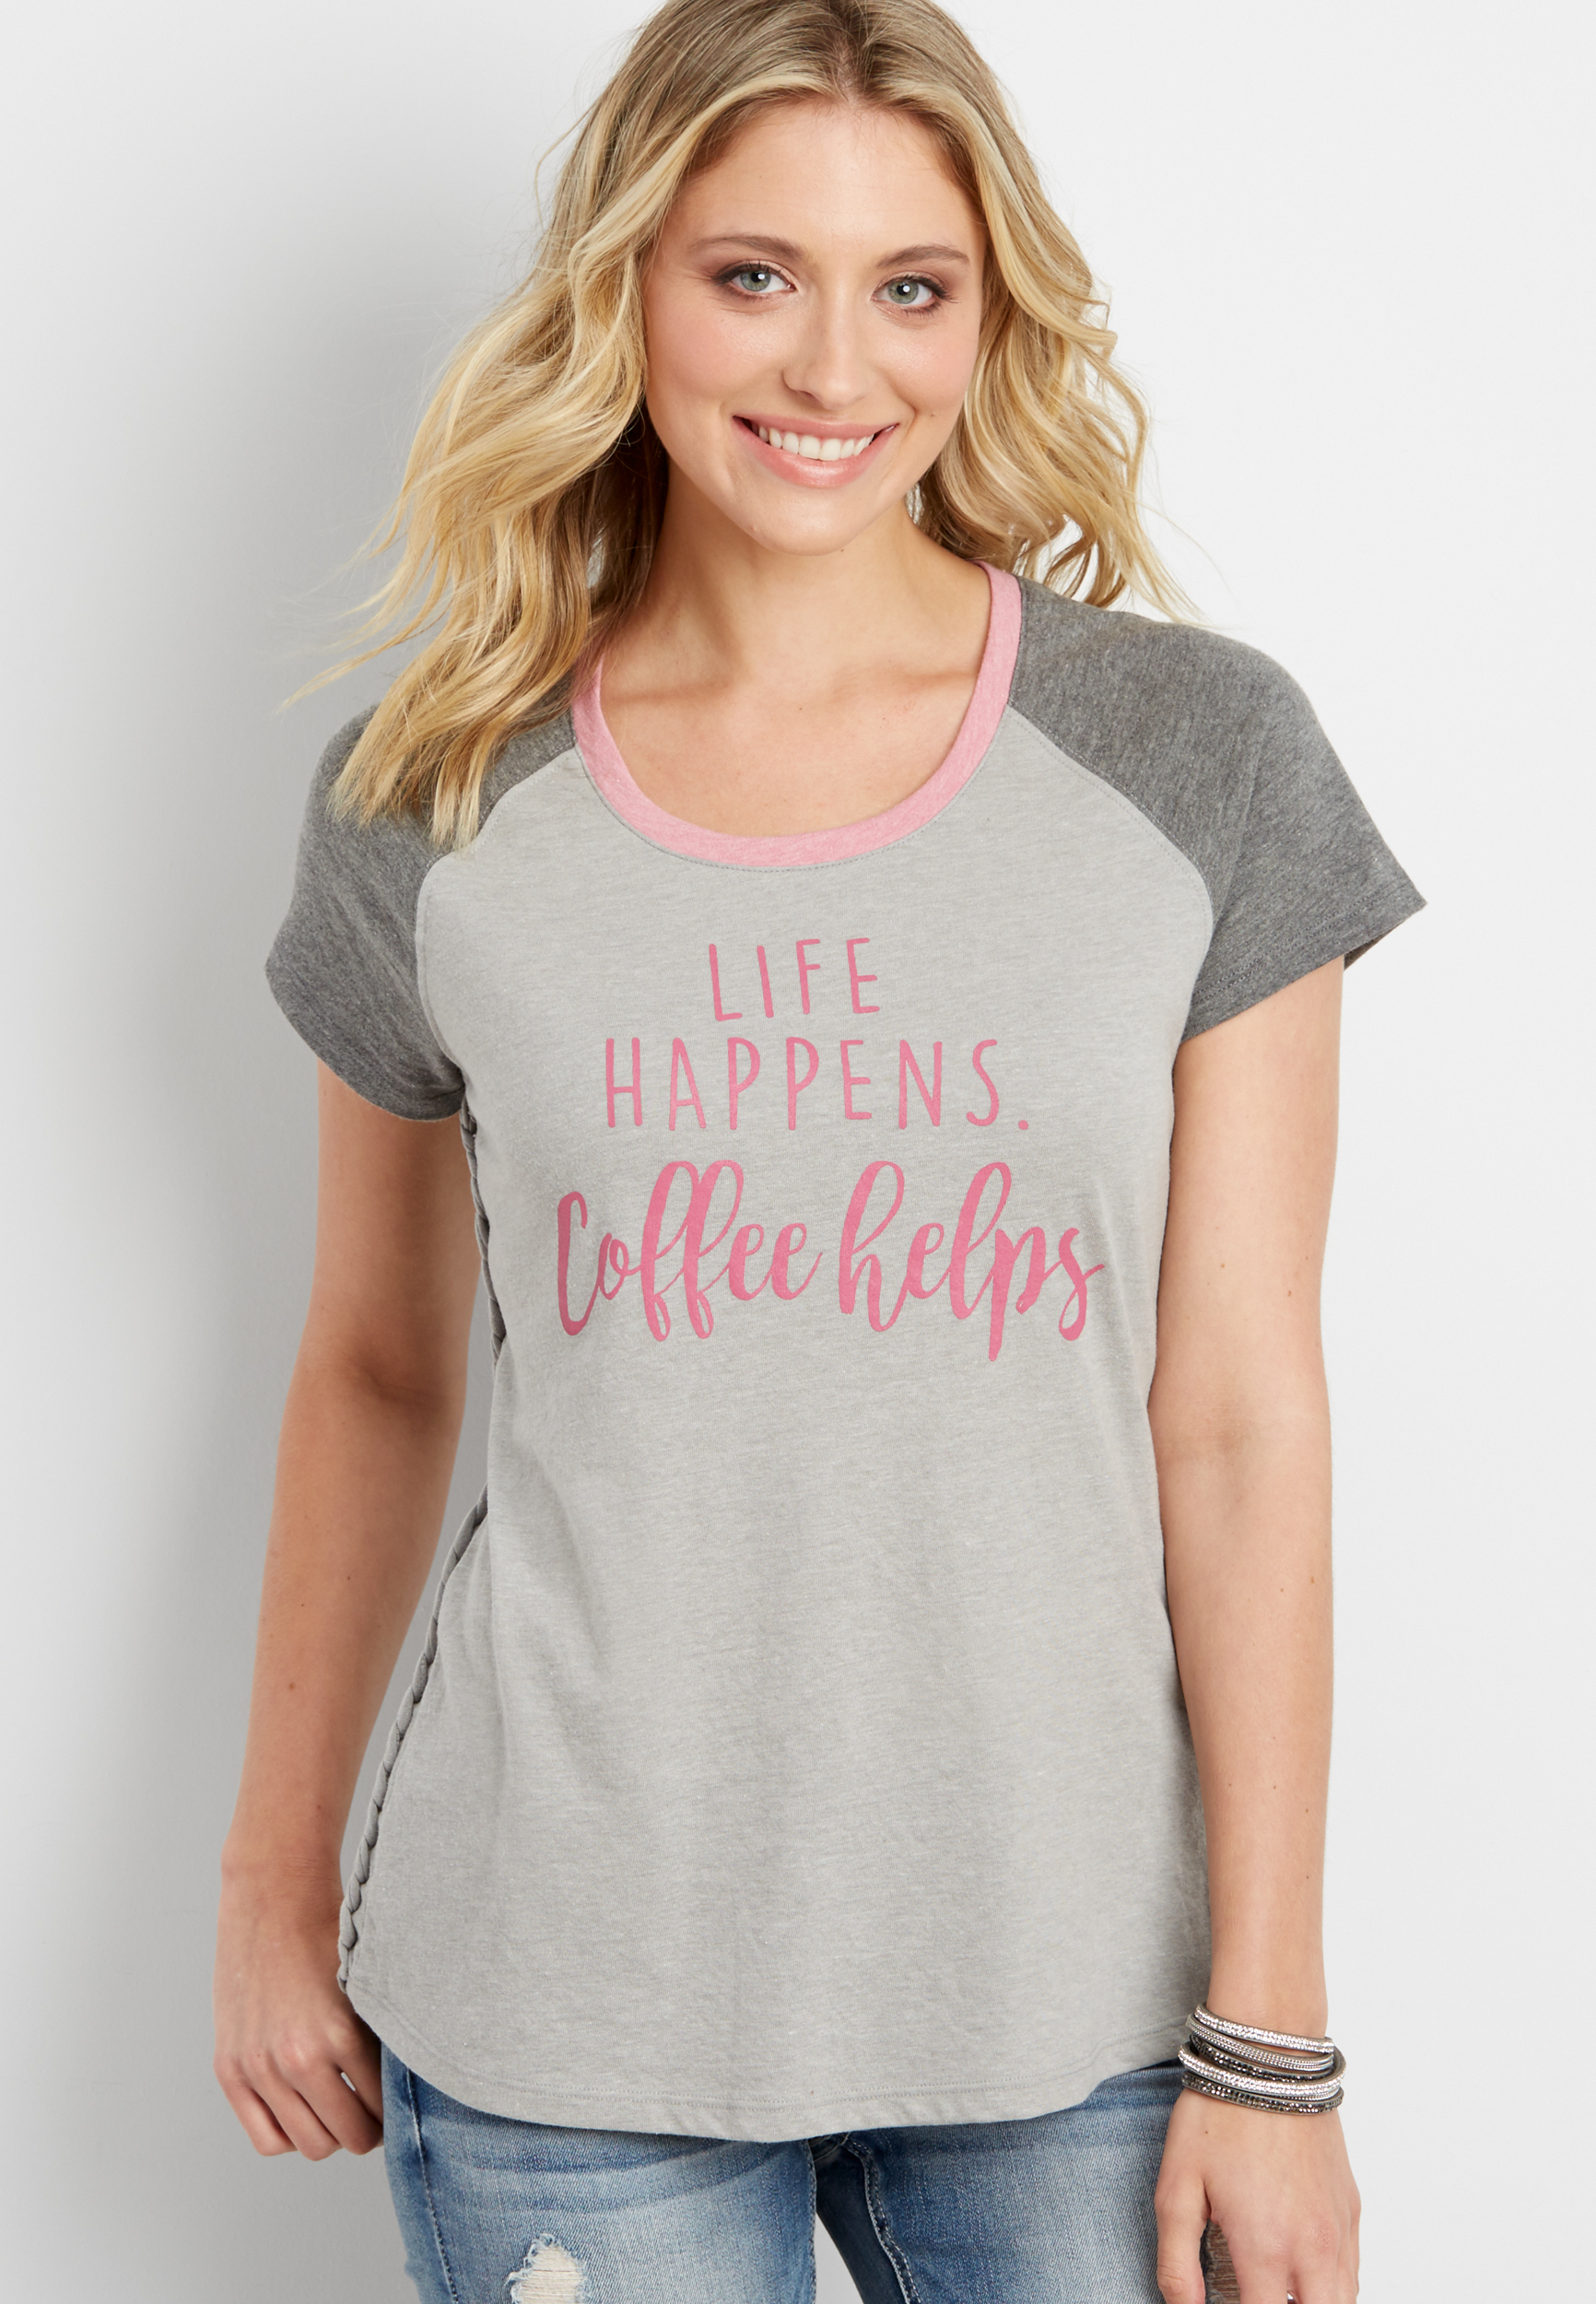 baseball tee with life happens coffee helps graphic | maurices